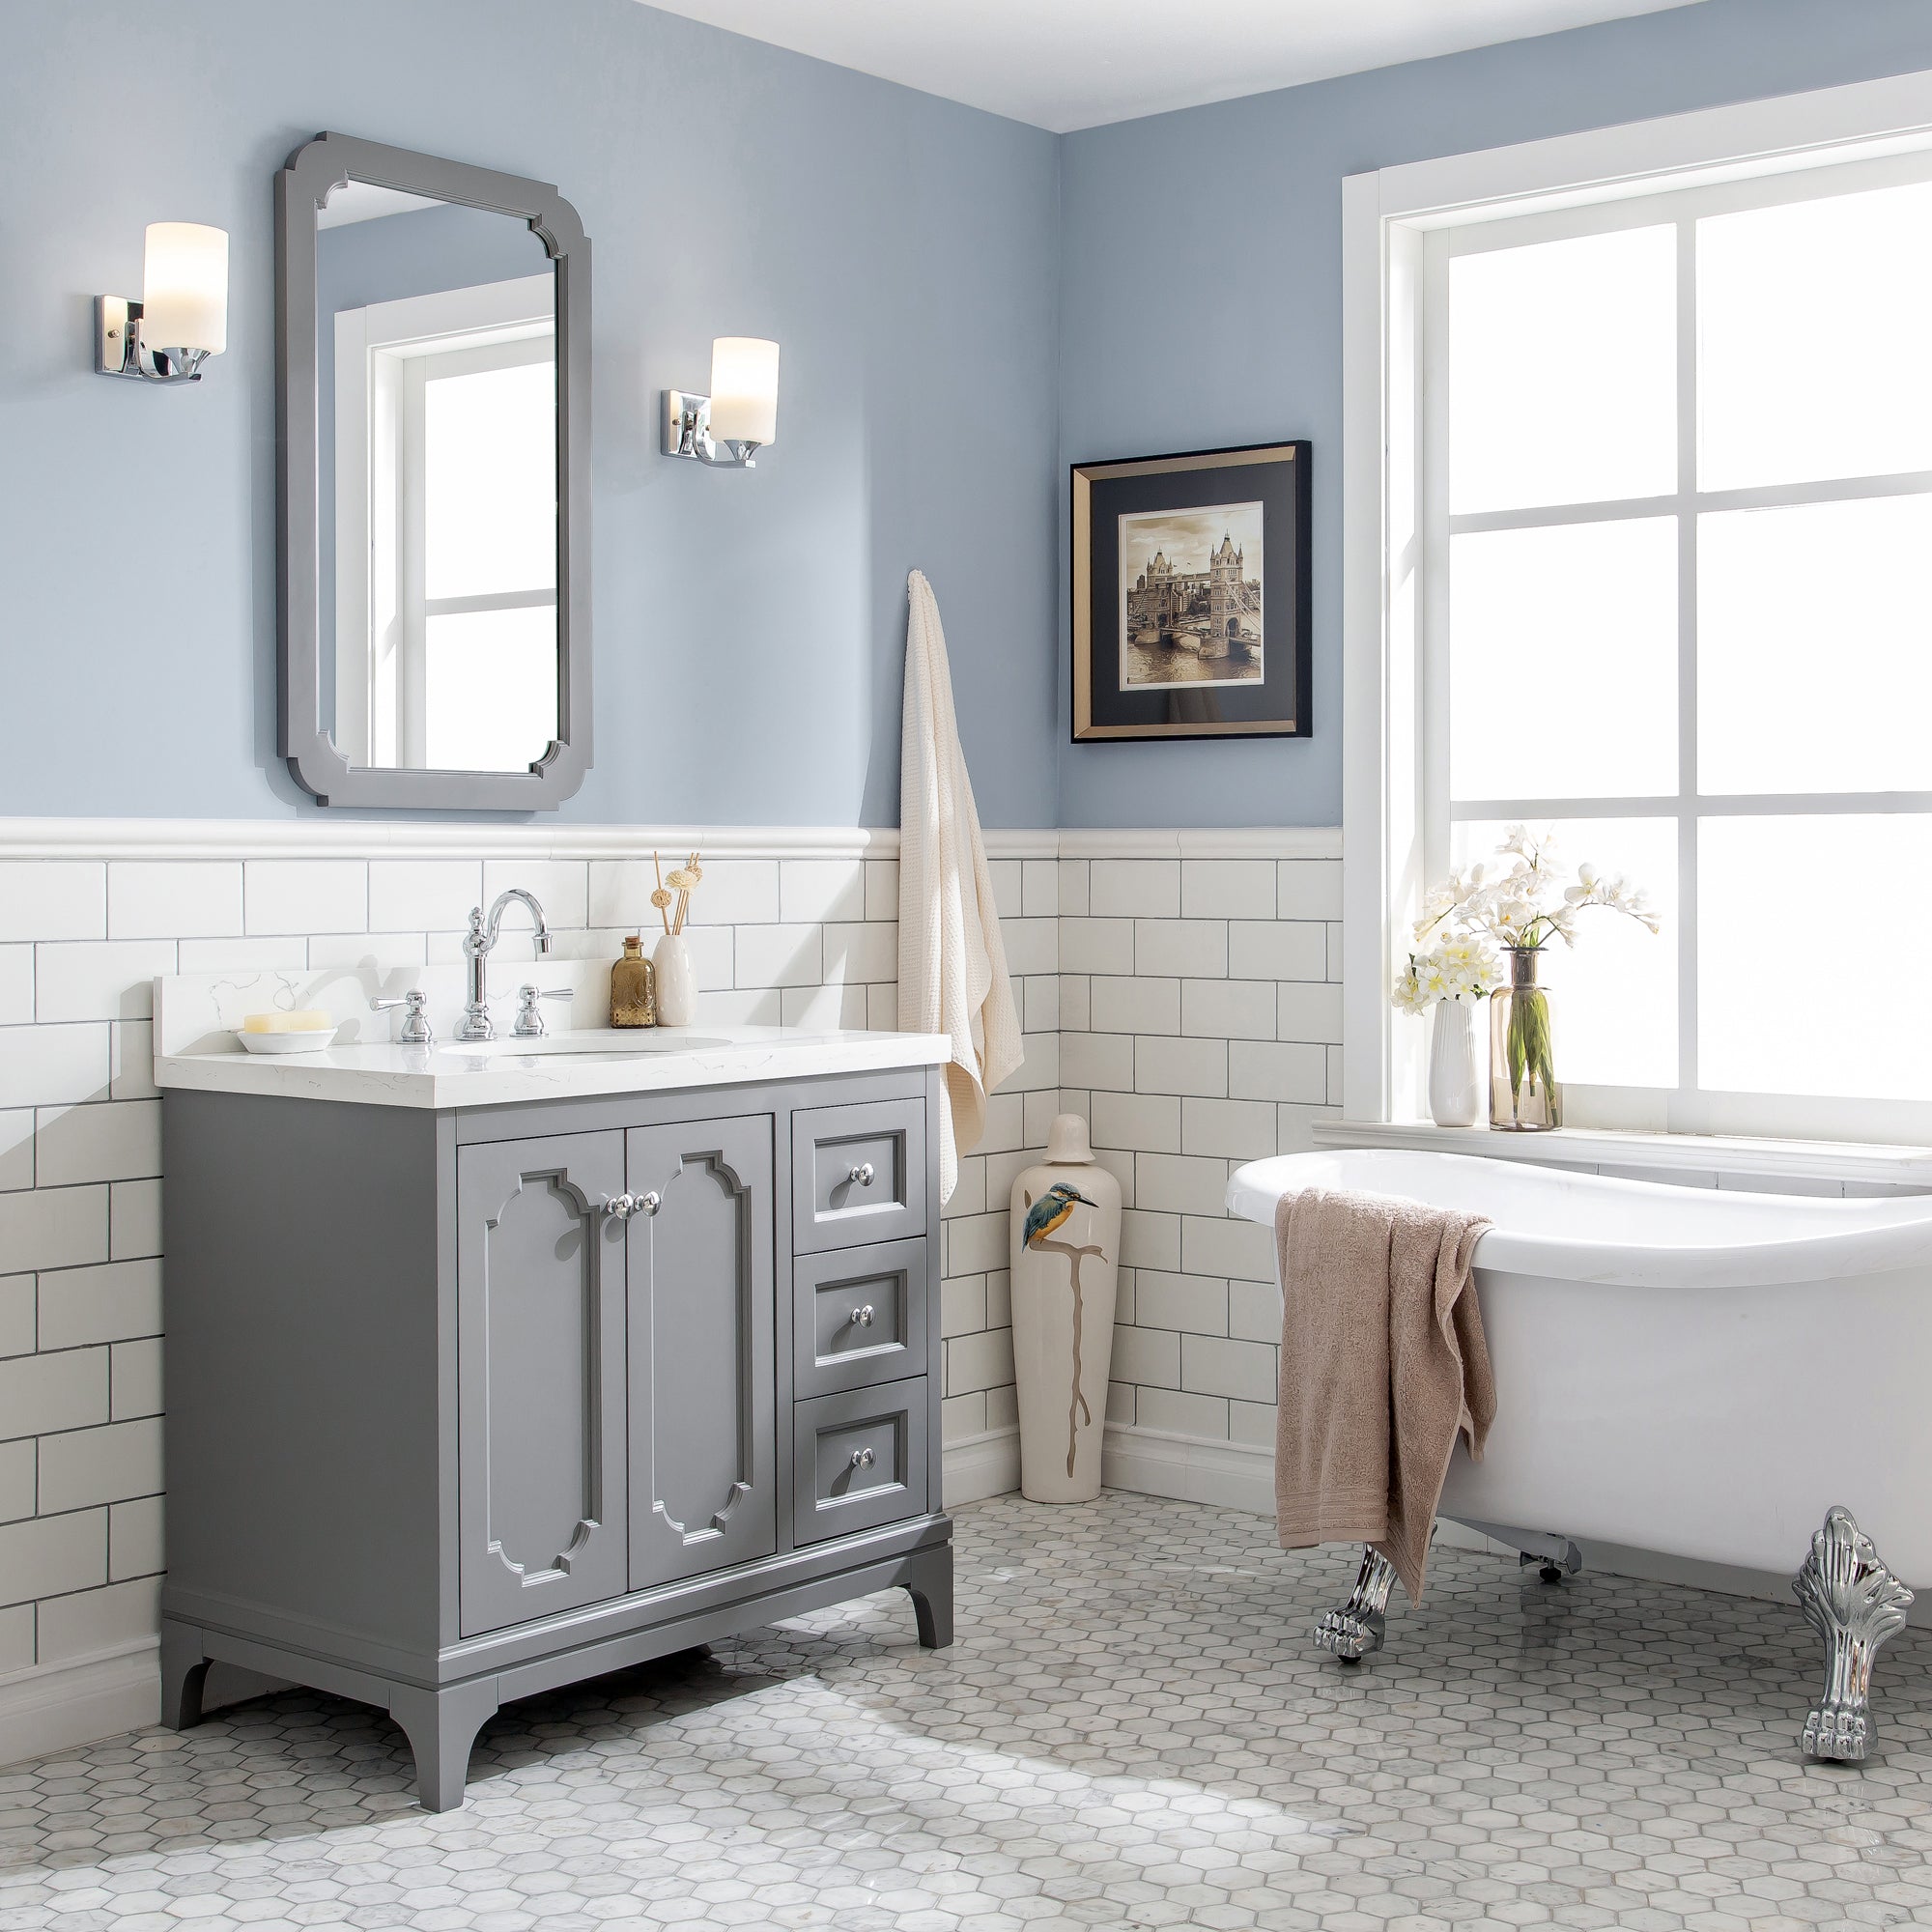 Water Creation | Queen 36-Inch Single Sink Quartz Carrara Vanity In Cashmere Grey With Matching Mirror(s) and F2-0012-01-TL Lavatory Faucet(s) | QU36QZ01CG-Q21TL1201